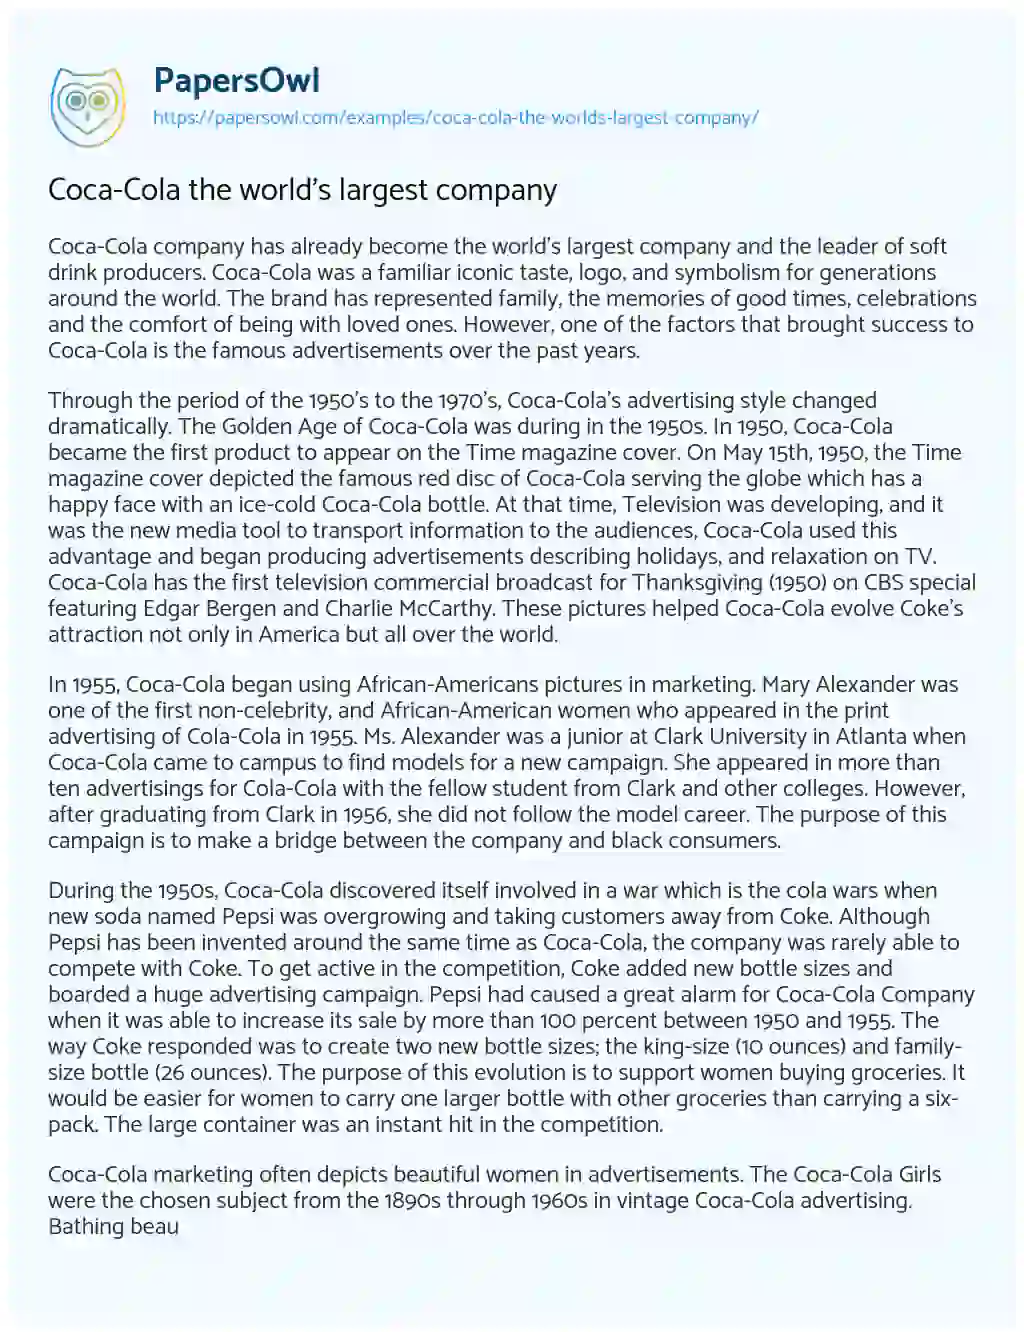 Essay on Coca-Cola the World’s Largest Company